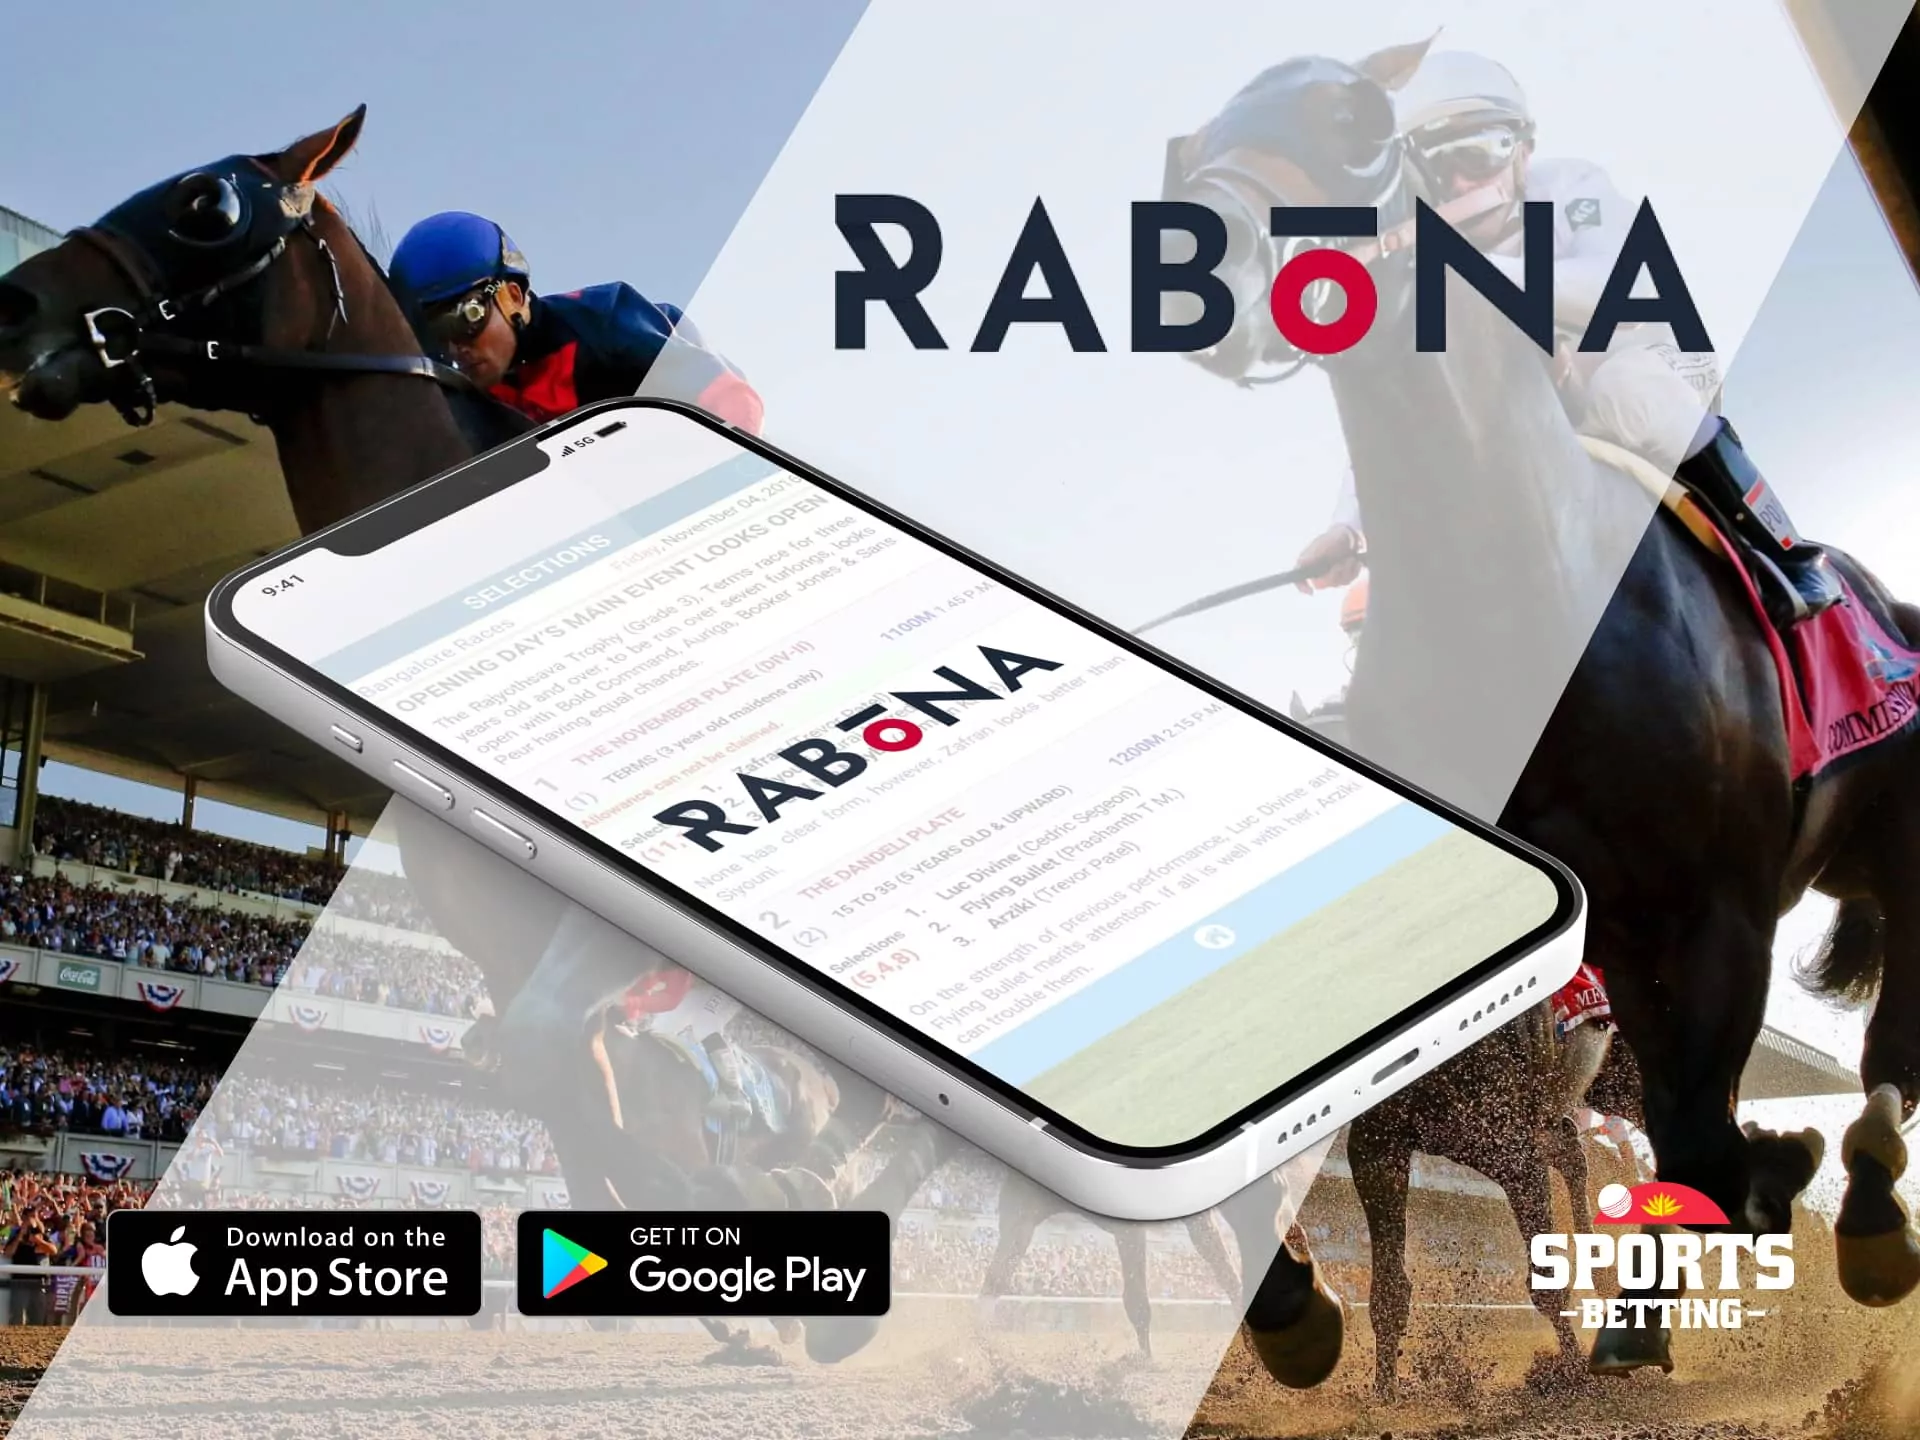 Rabona horse racing betting website with a straightforward and quick registration process.